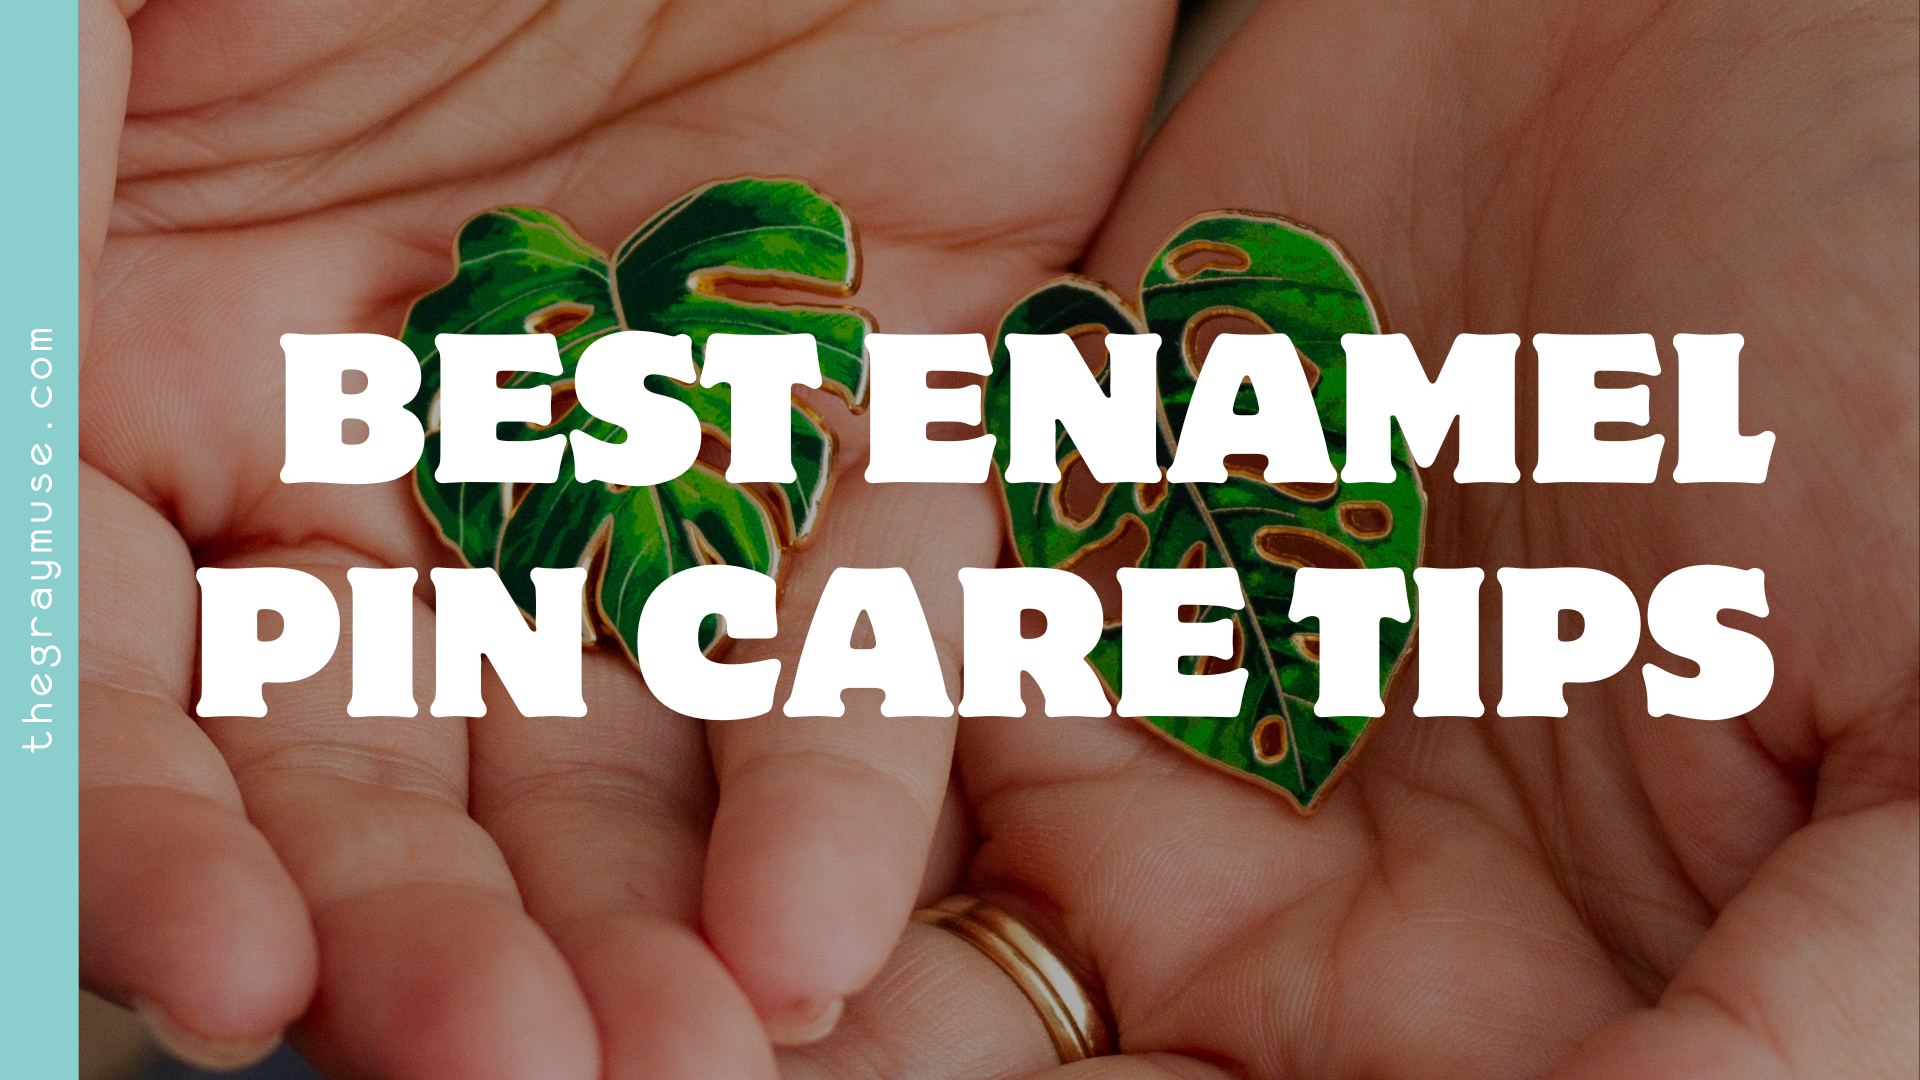 the best enamel pin care tips